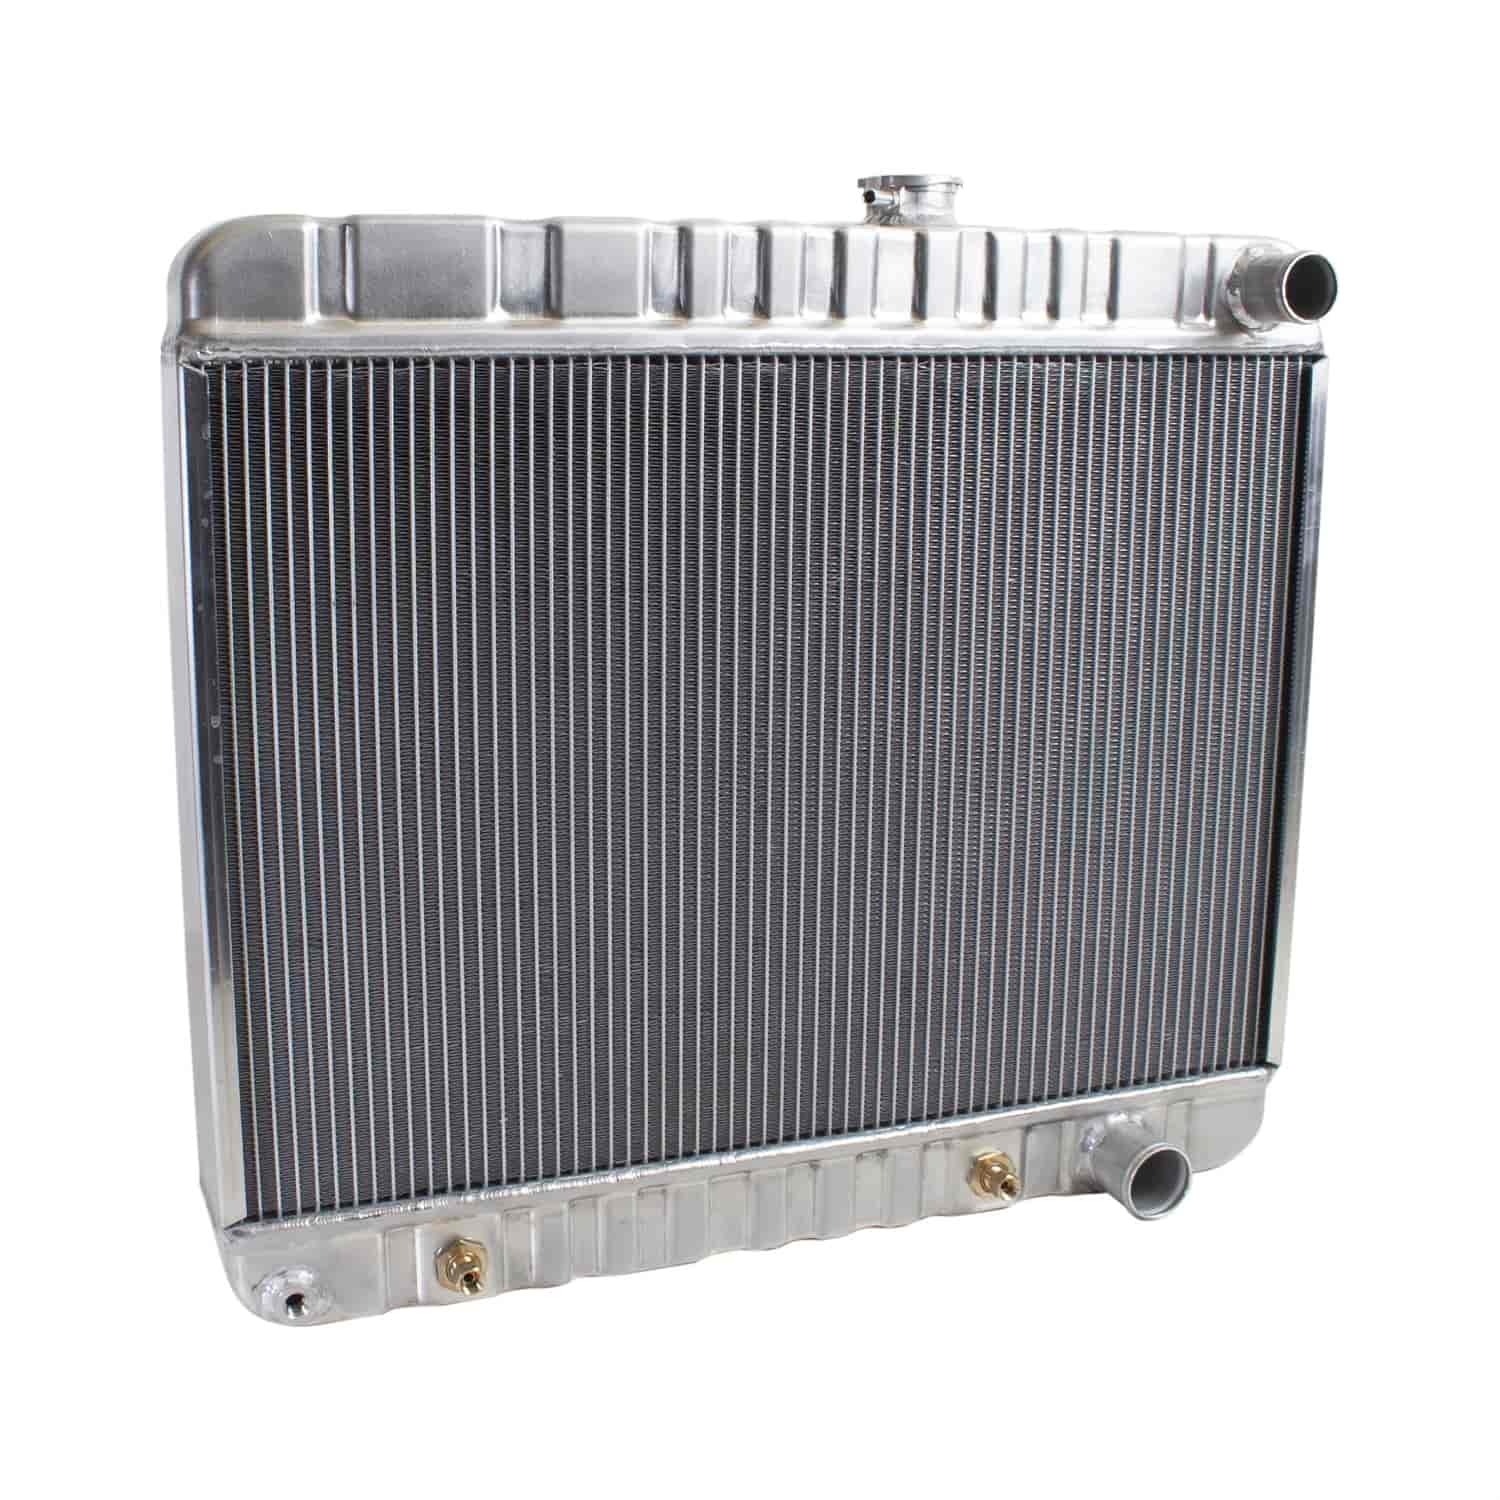 ExactFit Radiator for 1964-1965 GTO/Lemans/Tempest with Transmission Cooler